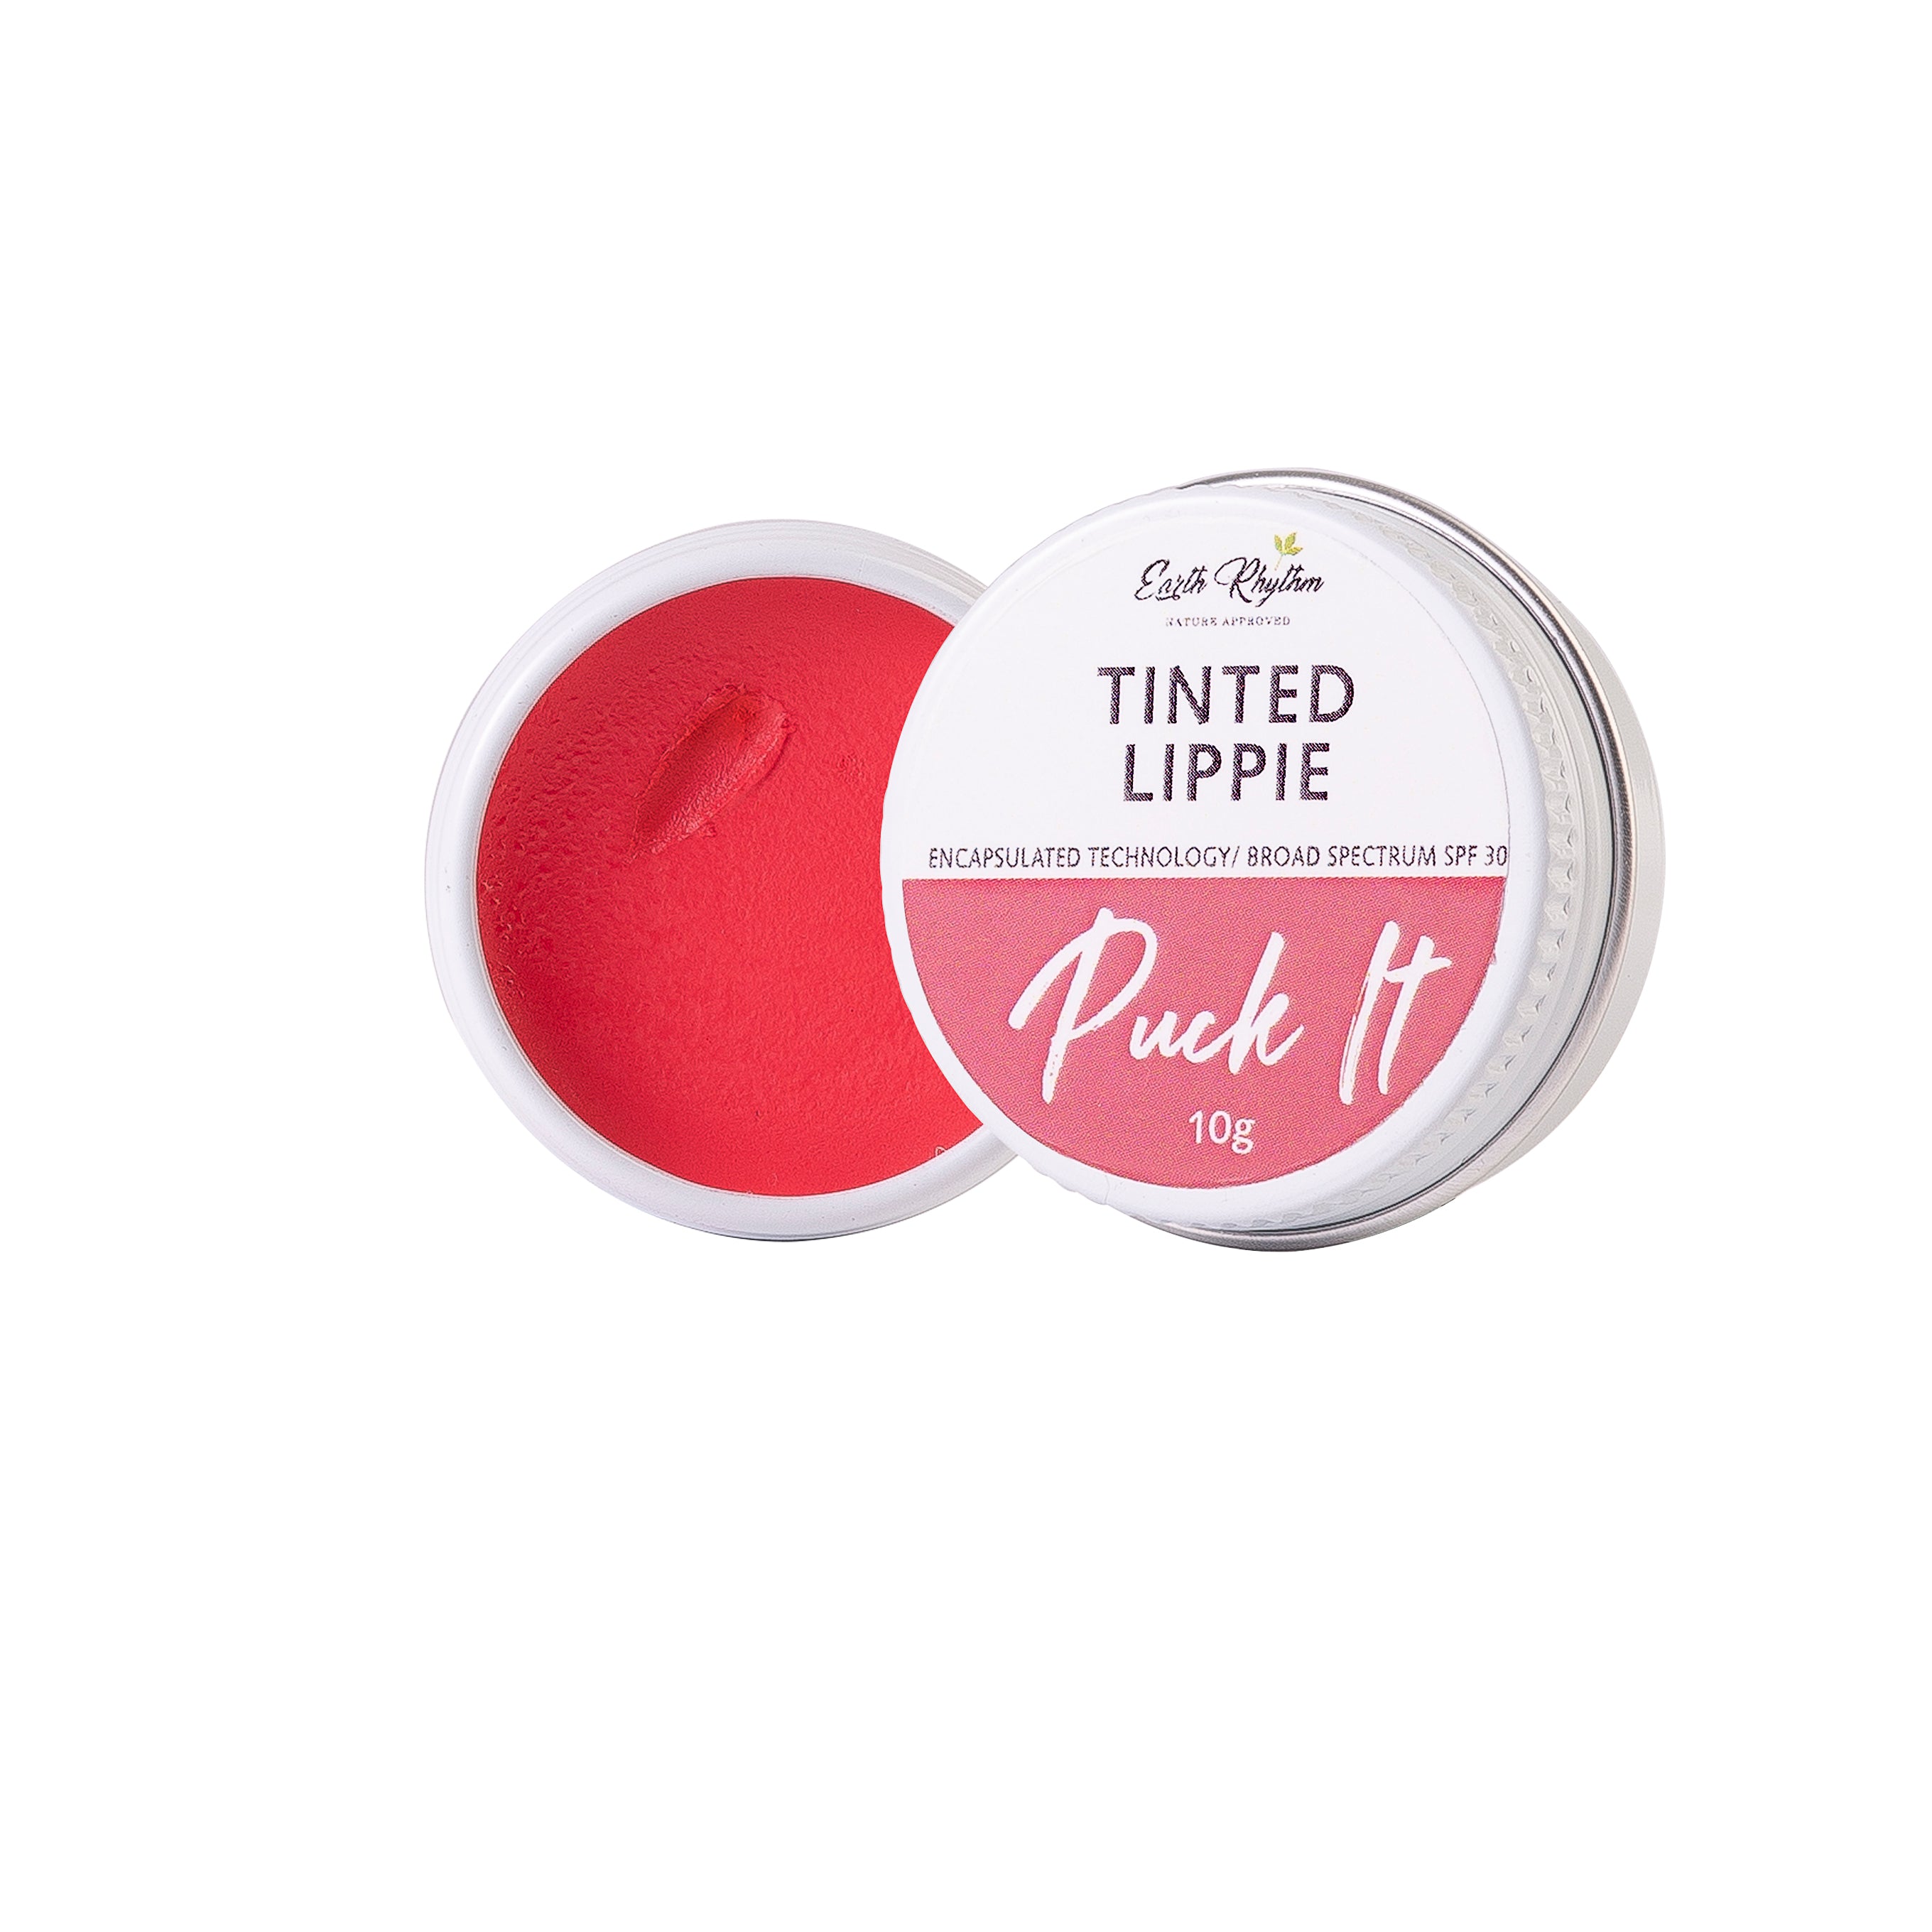 TINTED LIPPIE SPF 30 LADY BUG COLOR